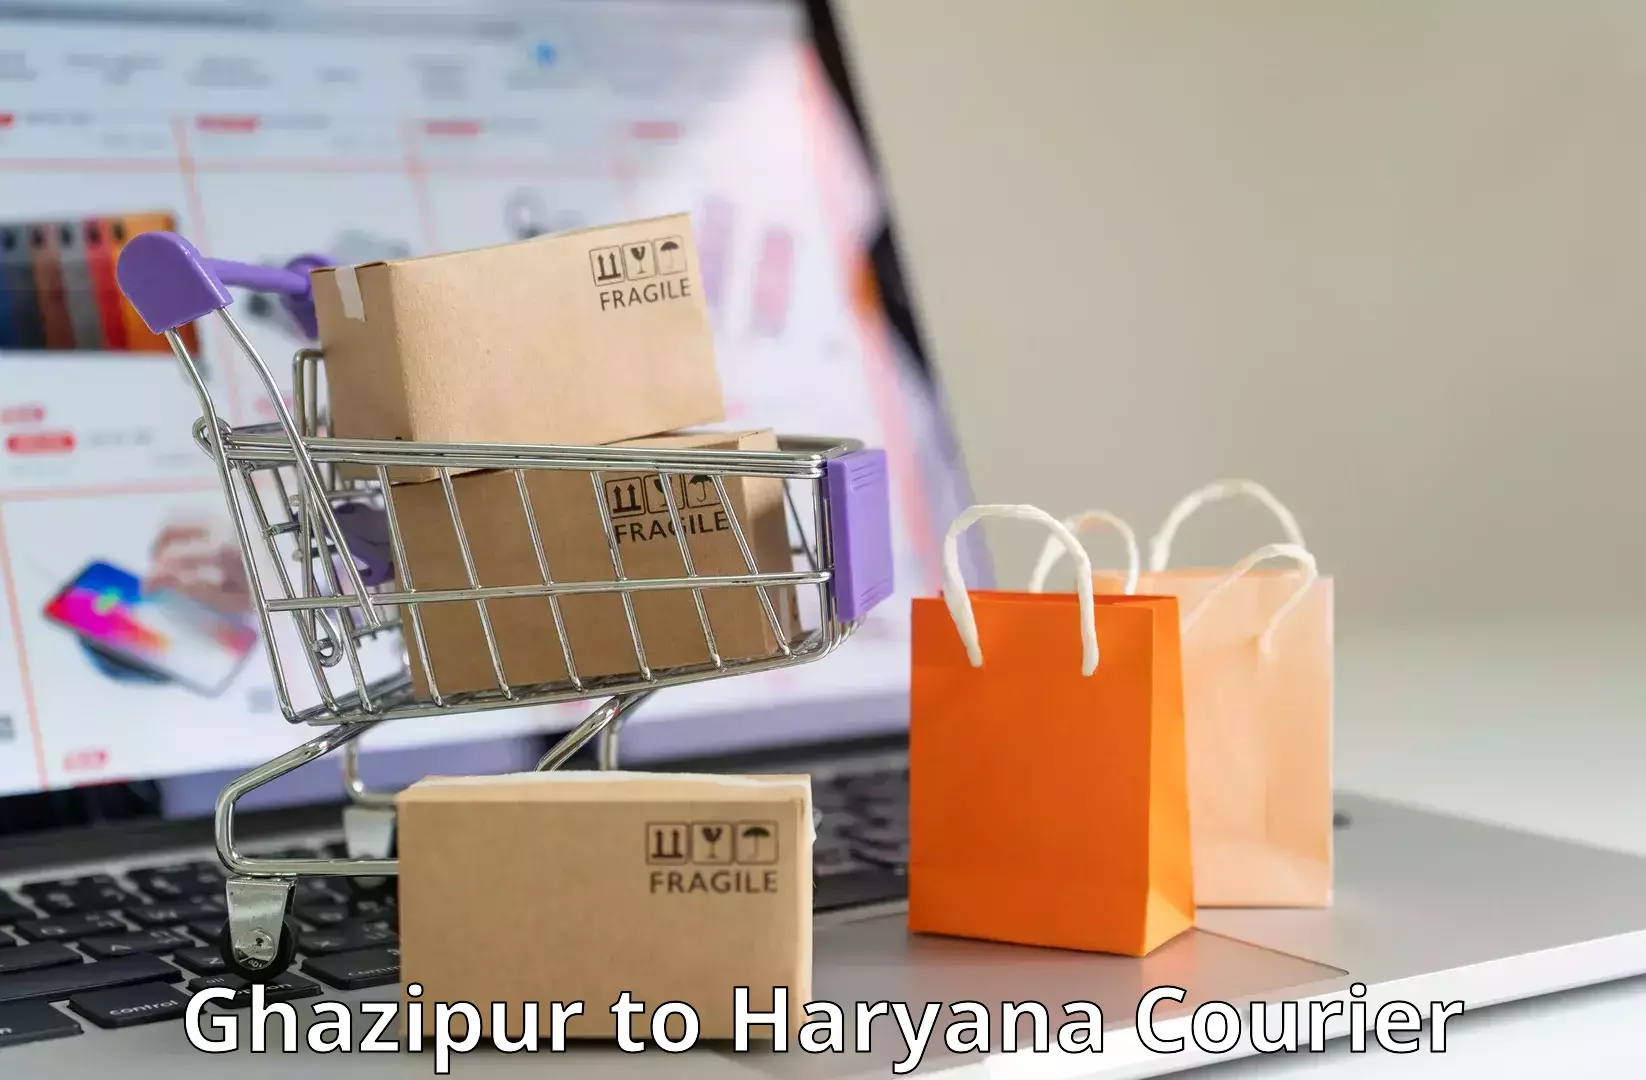 Bulk courier orders Ghazipur to Fatehabad